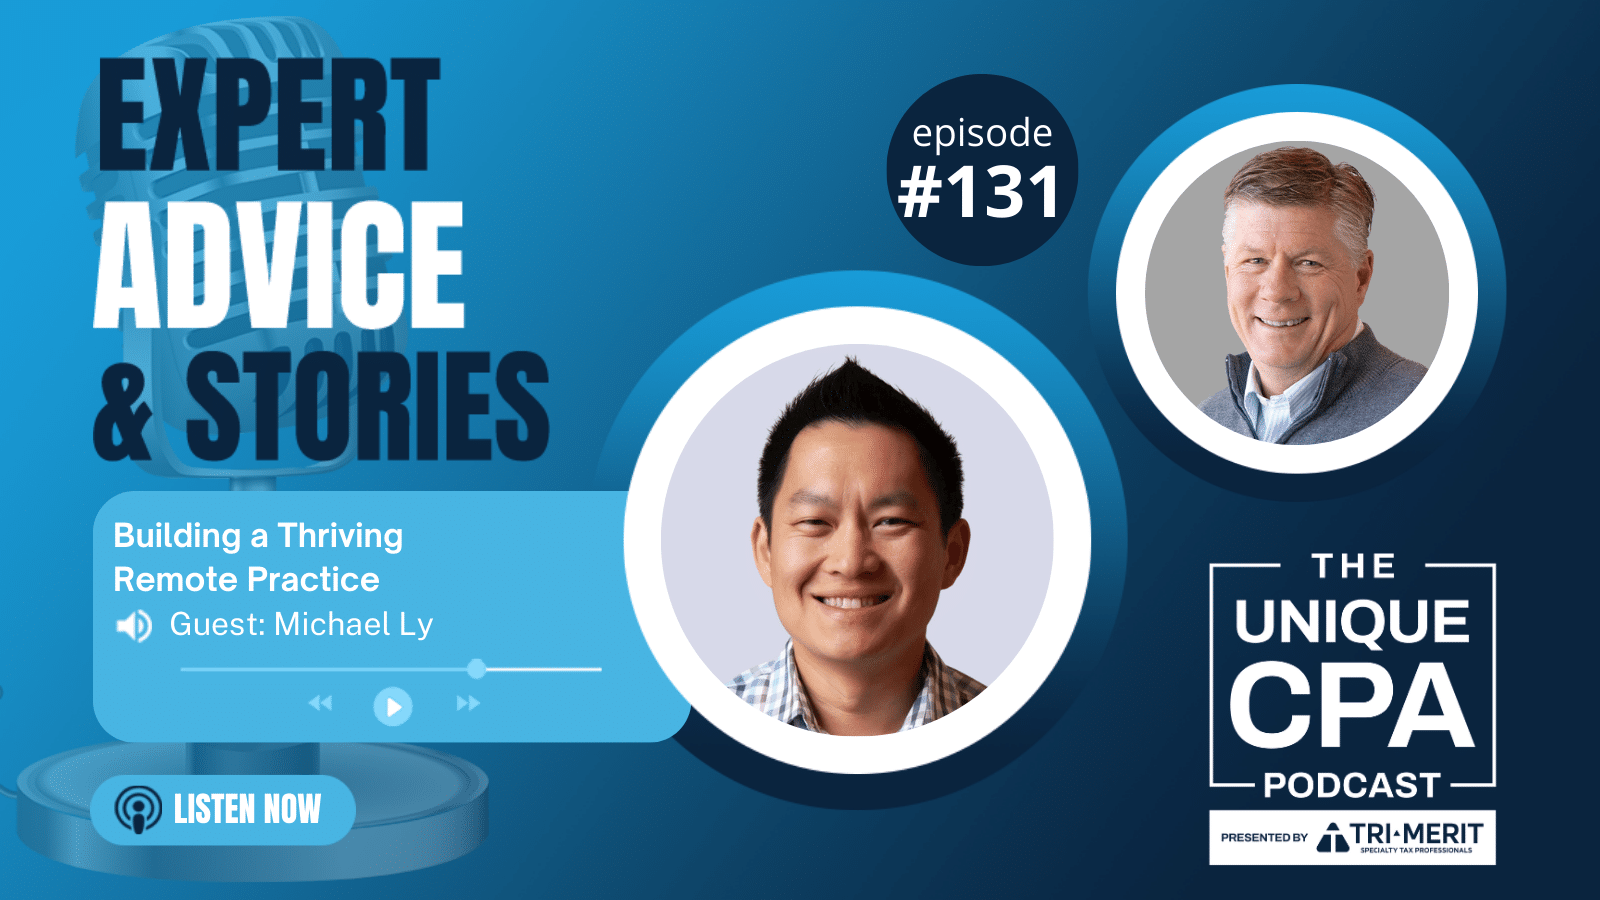 Unique Cpa Featured Image Ep 131 Michael Ly - Building A Thriving Remote Practice - Tri-Merit